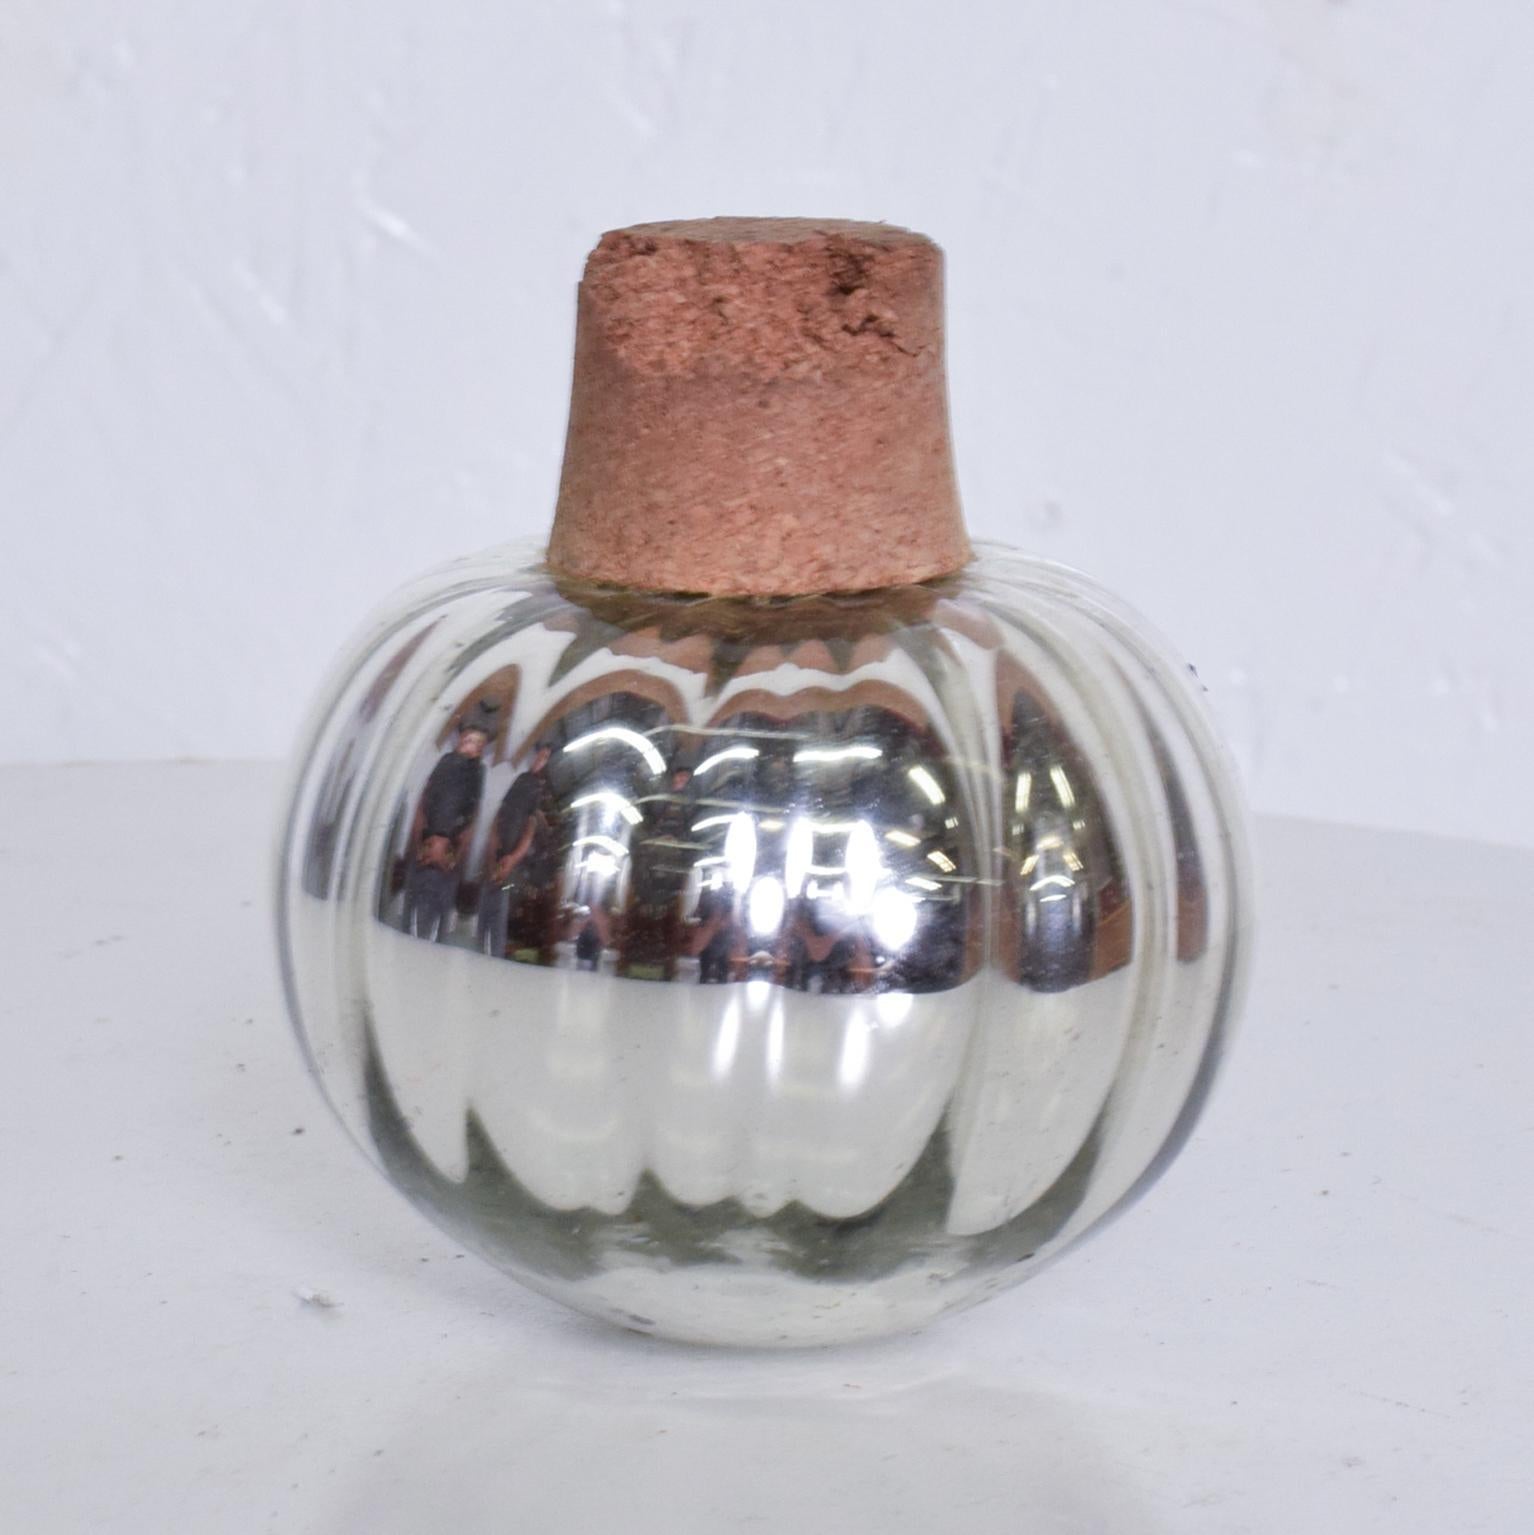 For your consideration, Mexican modern vintage mercury glass stopper. Made in Mexico in the 1970s. One of a kind stopper that can also be used as a decorative piece on your dining/office area.

Dimensions: 4